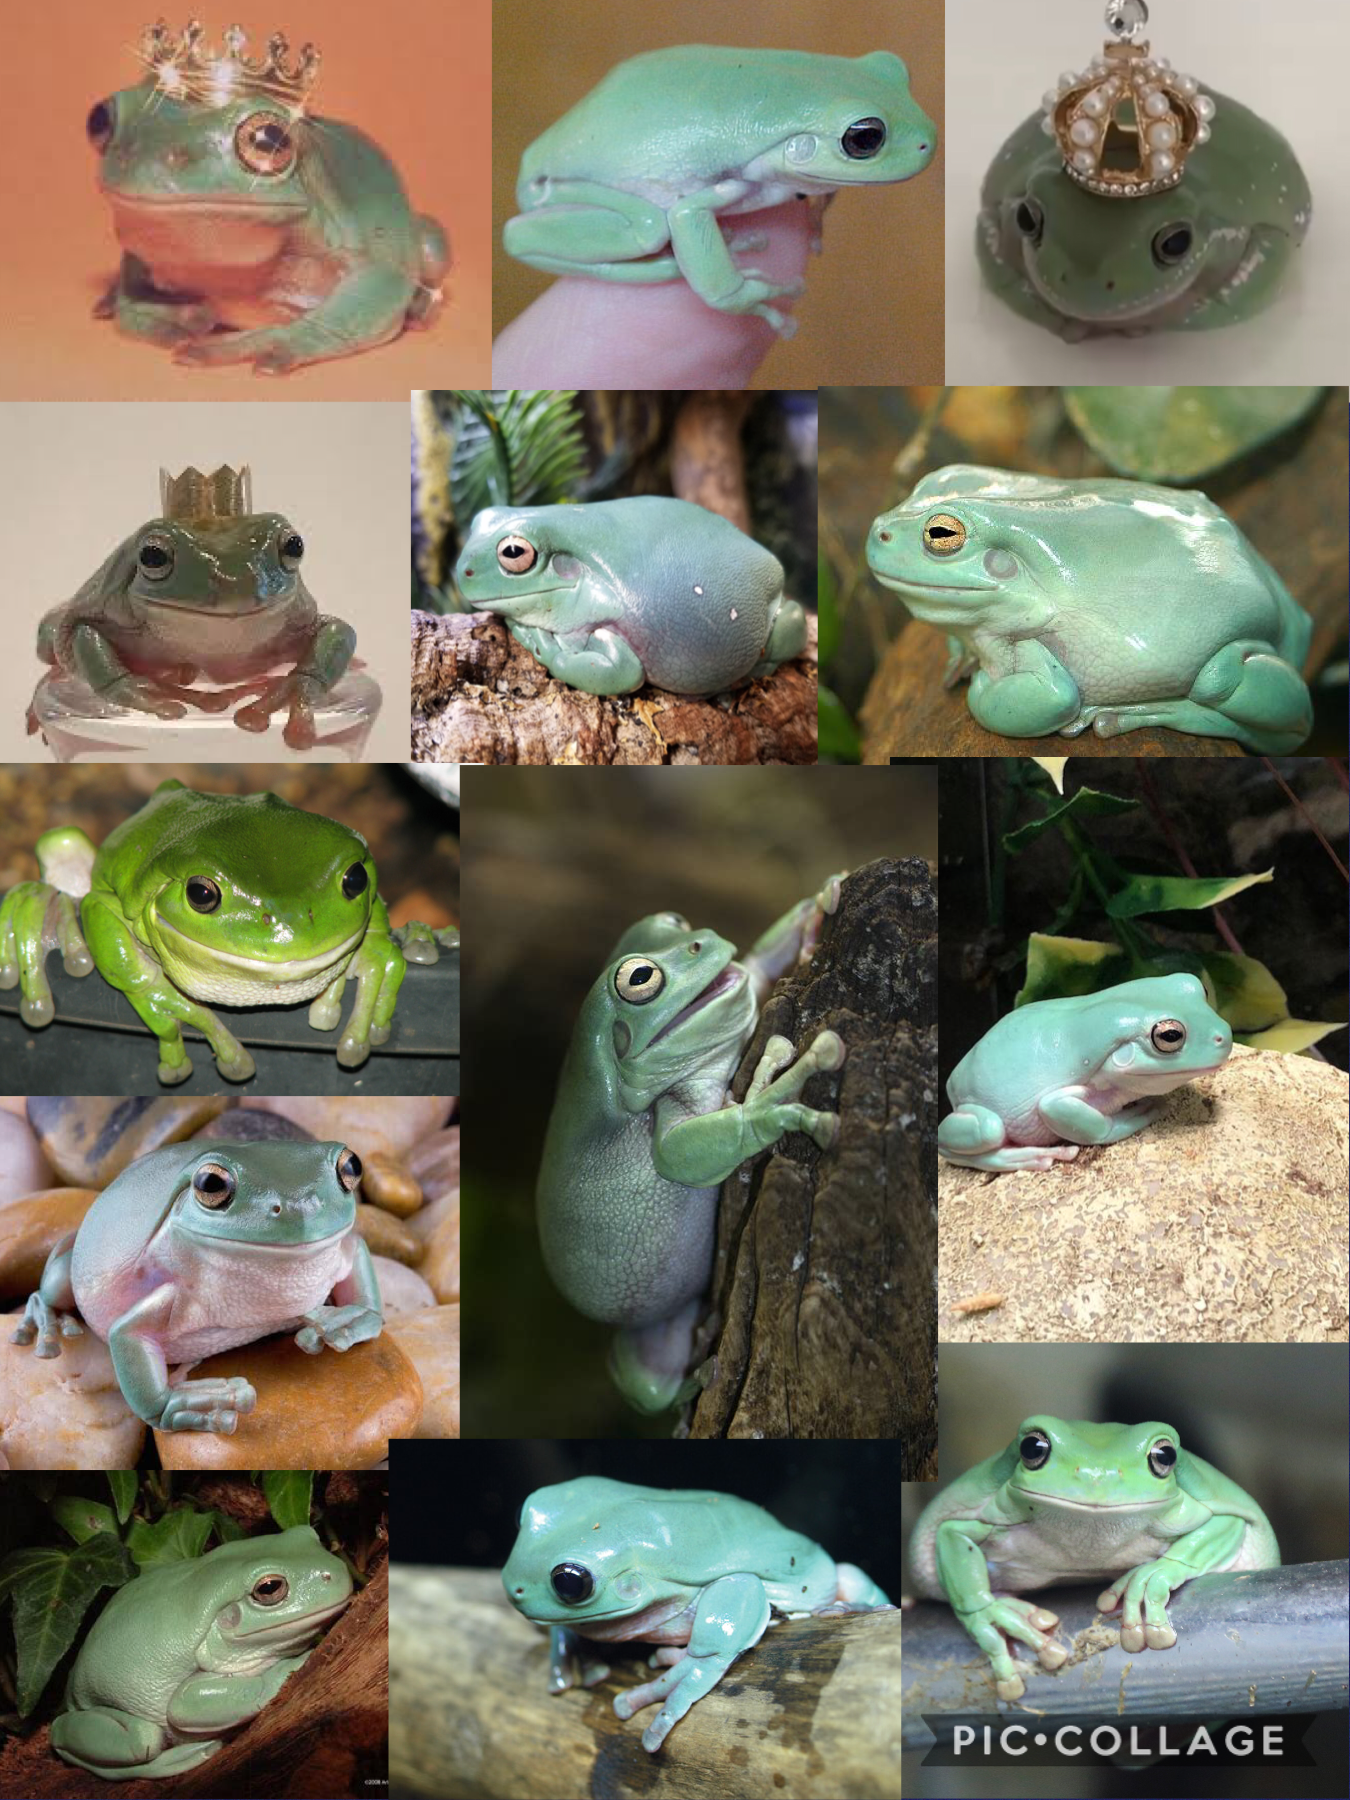 White’s Tree Frog Collage! You might know me from my old account @bubblewolf7878